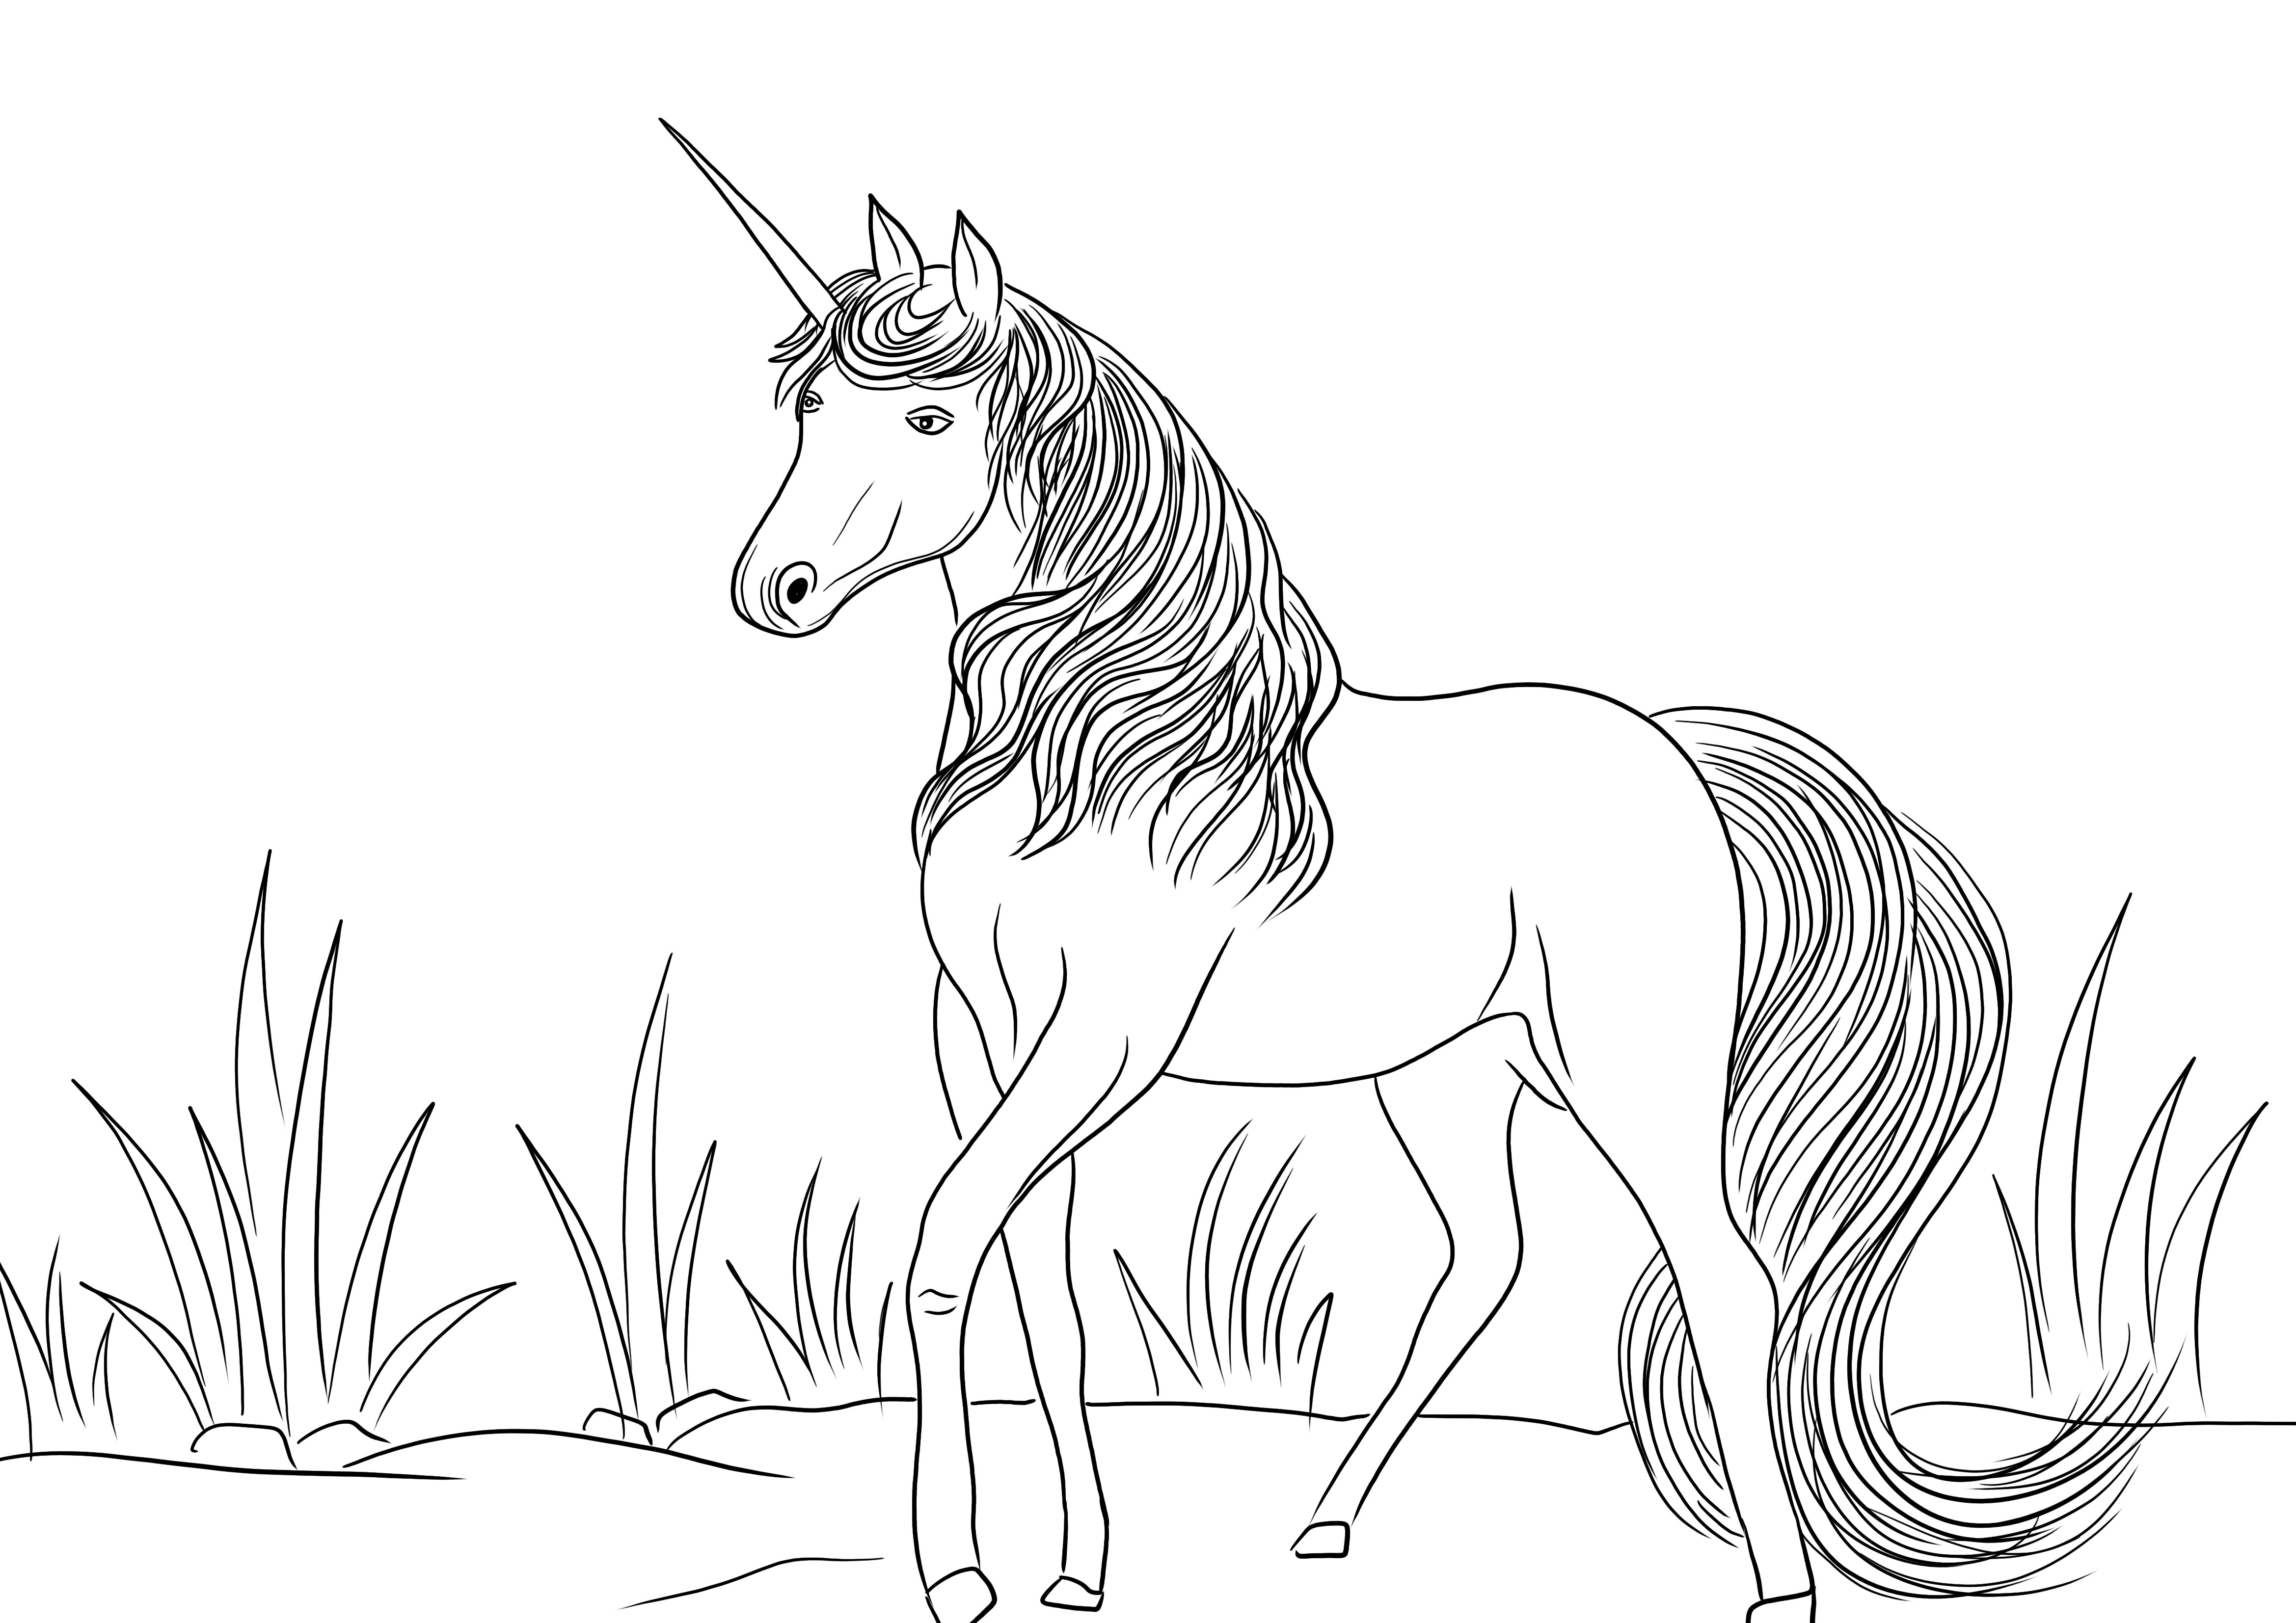 Free printable sheet of a Unicorn in the field to color by kids